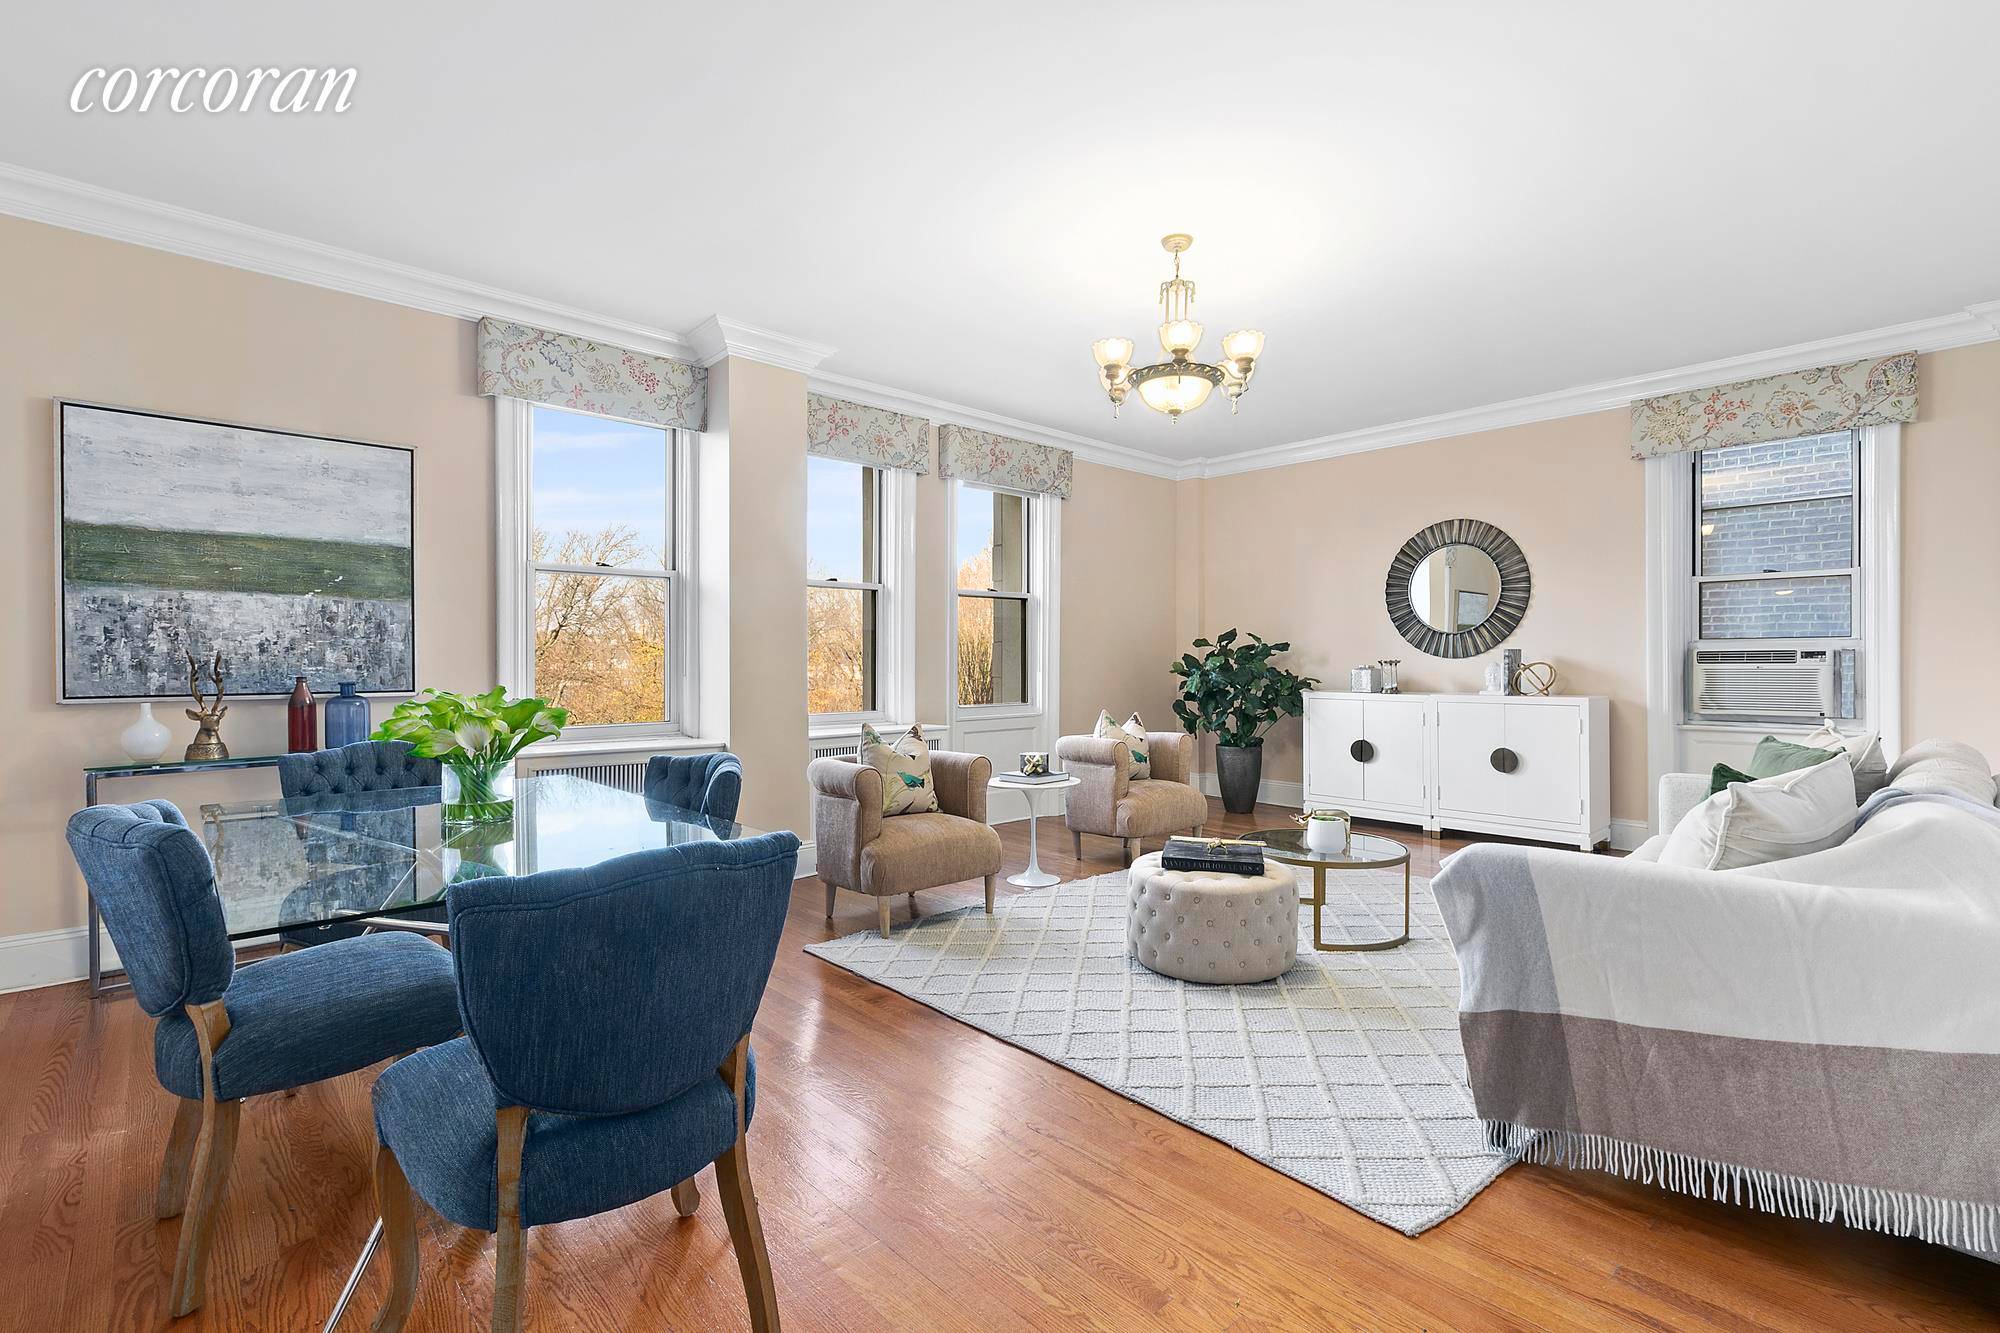 Offering the perfect combination of quality and location, this immaculate home delivers the finest of NYC living.